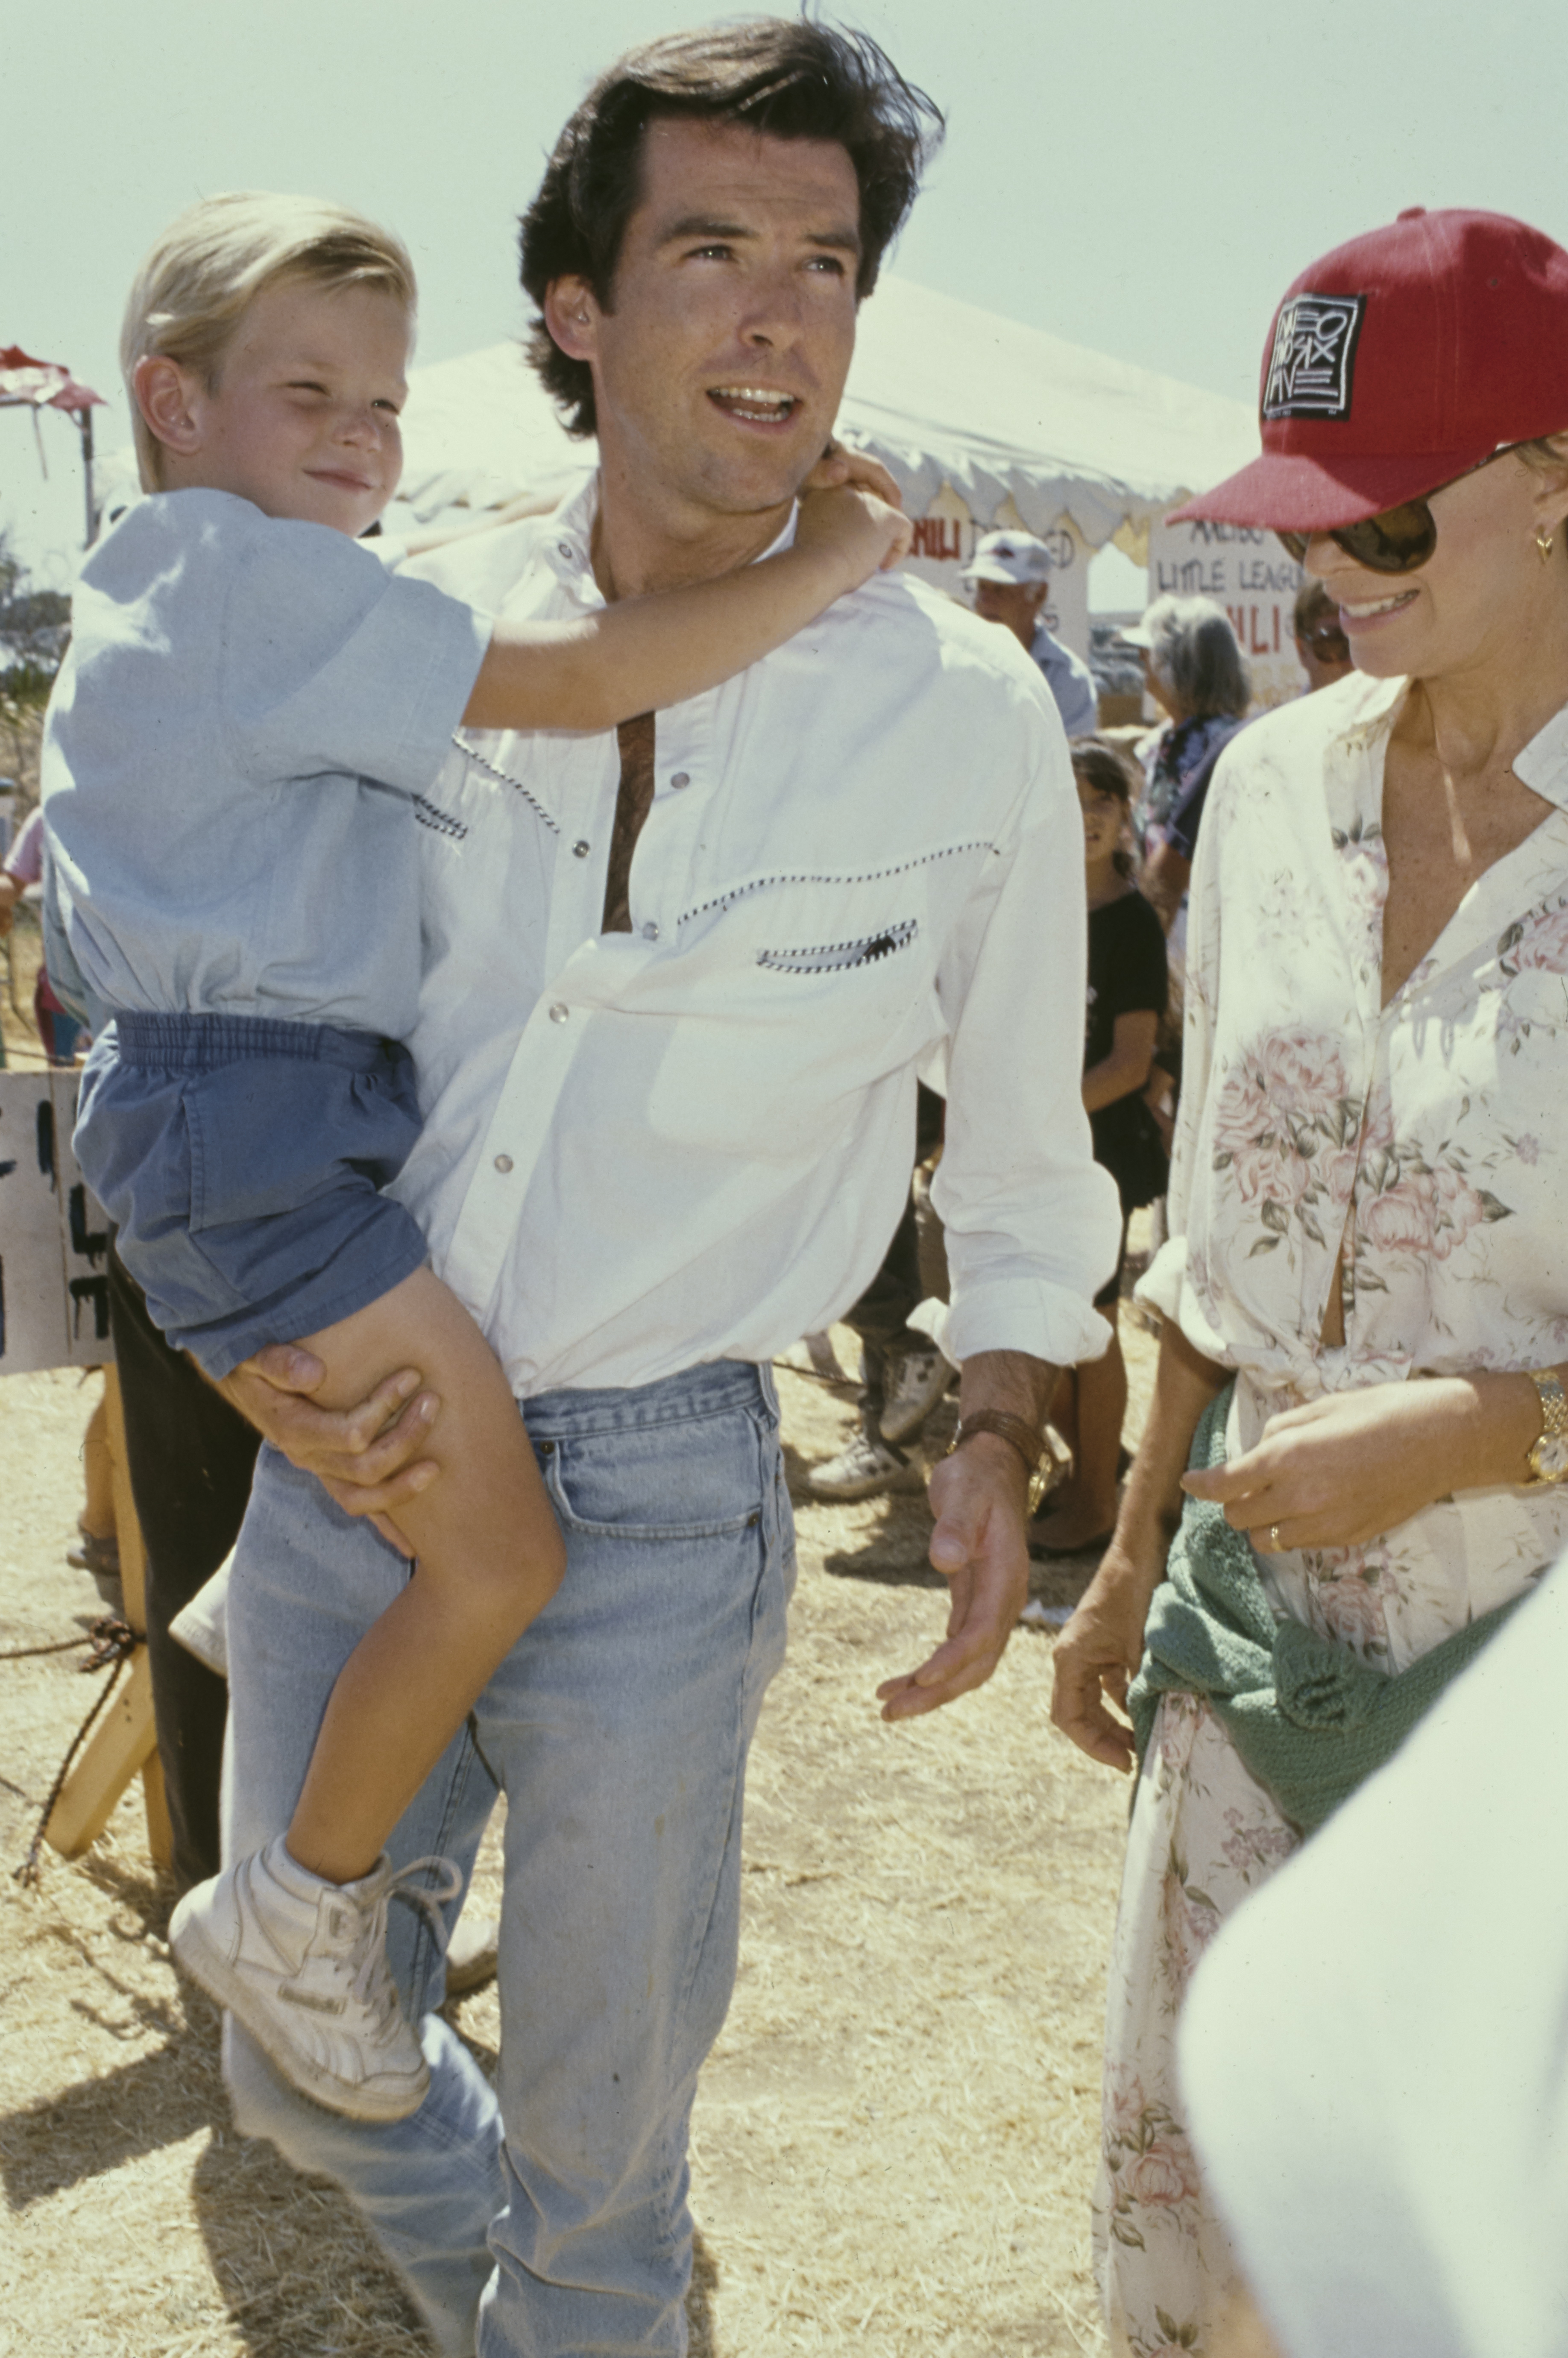 Pierce Brosnan, Sean Brosnan, and Cassandra Harris at the 8th Annual Malibu Kiwanis Chili Cook-off Carnival & Fair in California on September 2, 1989 | Source: Getty Images